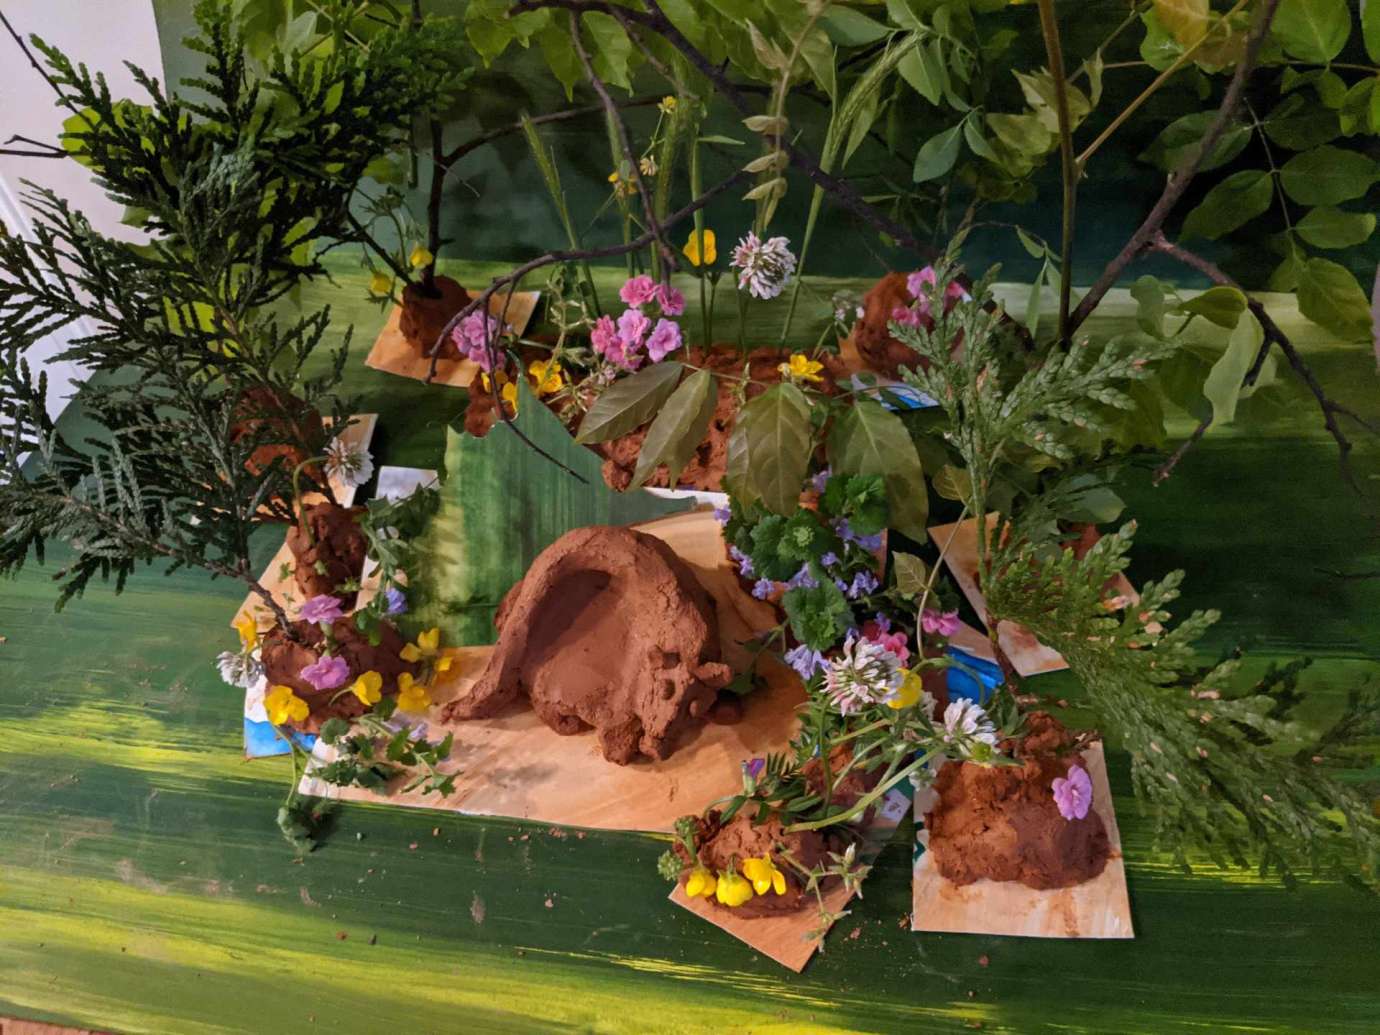 A diorama of a sleeping creature surrounded by flowers and leaves